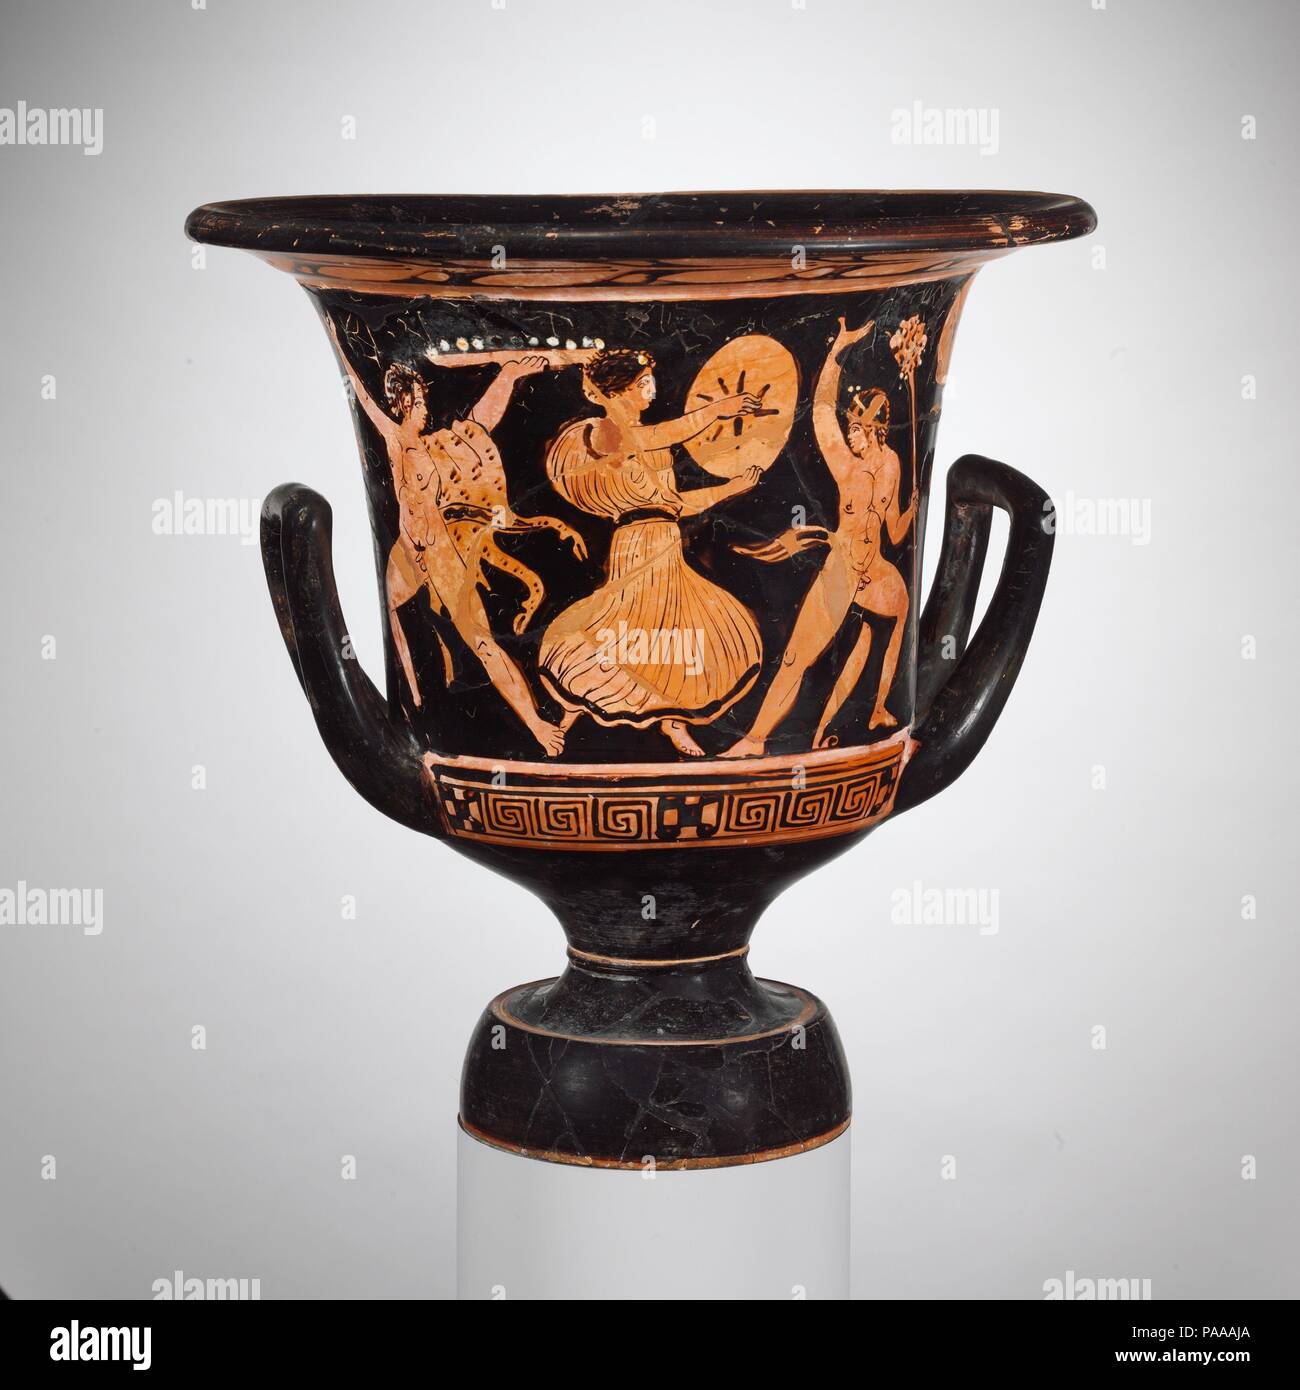 Terracotta calyx-krater (vase for mixing wine and water). Culture: Greek,  Attic. Dimensions: H. 14 1/8 in. (35.9 cm); diameter of mouth 13 5/8 in.  (34.6 cm). Date: early 4th century B.C.. Obverse,